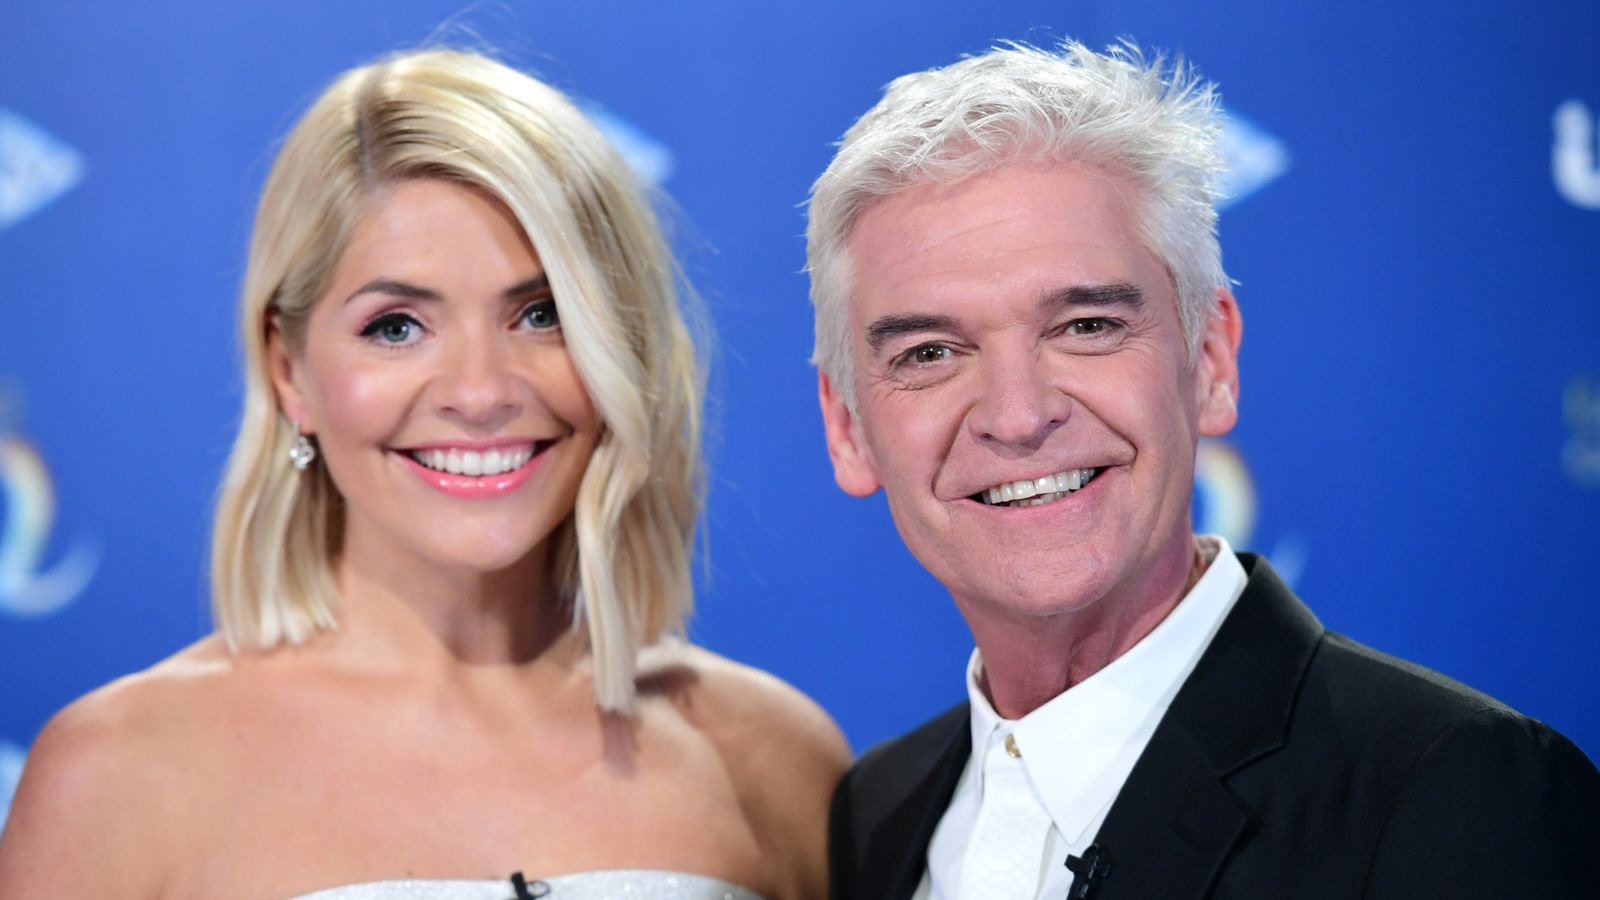 Holly Willoughby accuses Phillip Schofield of lying to her about affair in first statement since he quit ITV